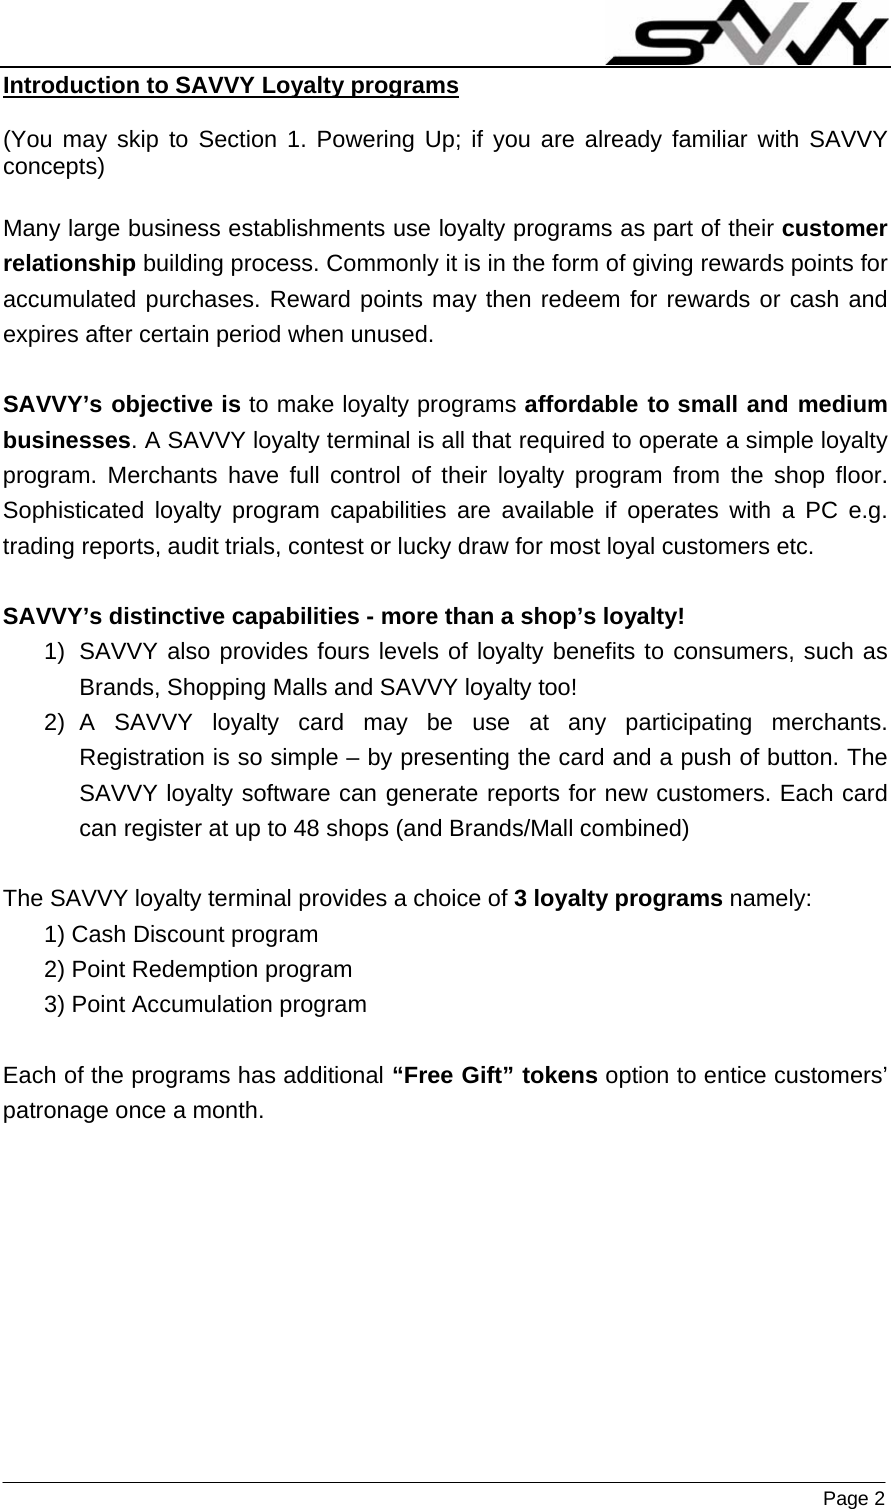                    Page 2  Introduction to SAVVY Loyalty programs   (You may skip to Section 1. Powering Up; if you are already familiar with SAVVY concepts)  Many large business establishments use loyalty programs as part of their customer relationship building process. Commonly it is in the form of giving rewards points for accumulated purchases. Reward points may then redeem for rewards or cash and expires after certain period when unused.  SAVVY’s objective is to make loyalty programs affordable to small and medium businesses. A SAVVY loyalty terminal is all that required to operate a simple loyalty program. Merchants have full control of their loyalty program from the shop floor. Sophisticated loyalty program capabilities are available if operates with a PC e.g. trading reports, audit trials, contest or lucky draw for most loyal customers etc.  SAVVY’s distinctive capabilities - more than a shop’s loyalty!  1)  SAVVY also provides fours levels of loyalty benefits to consumers, such as Brands, Shopping Malls and SAVVY loyalty too! 2) A SAVVY loyalty card may be use at any participating merchants. Registration is so simple – by presenting the card and a push of button. The SAVVY loyalty software can generate reports for new customers. Each card can register at up to 48 shops (and Brands/Mall combined)  The SAVVY loyalty terminal provides a choice of 3 loyalty programs namely: 1) Cash Discount program 2) Point Redemption program 3) Point Accumulation program  Each of the programs has additional “Free Gift” tokens option to entice customers’ patronage once a month.  